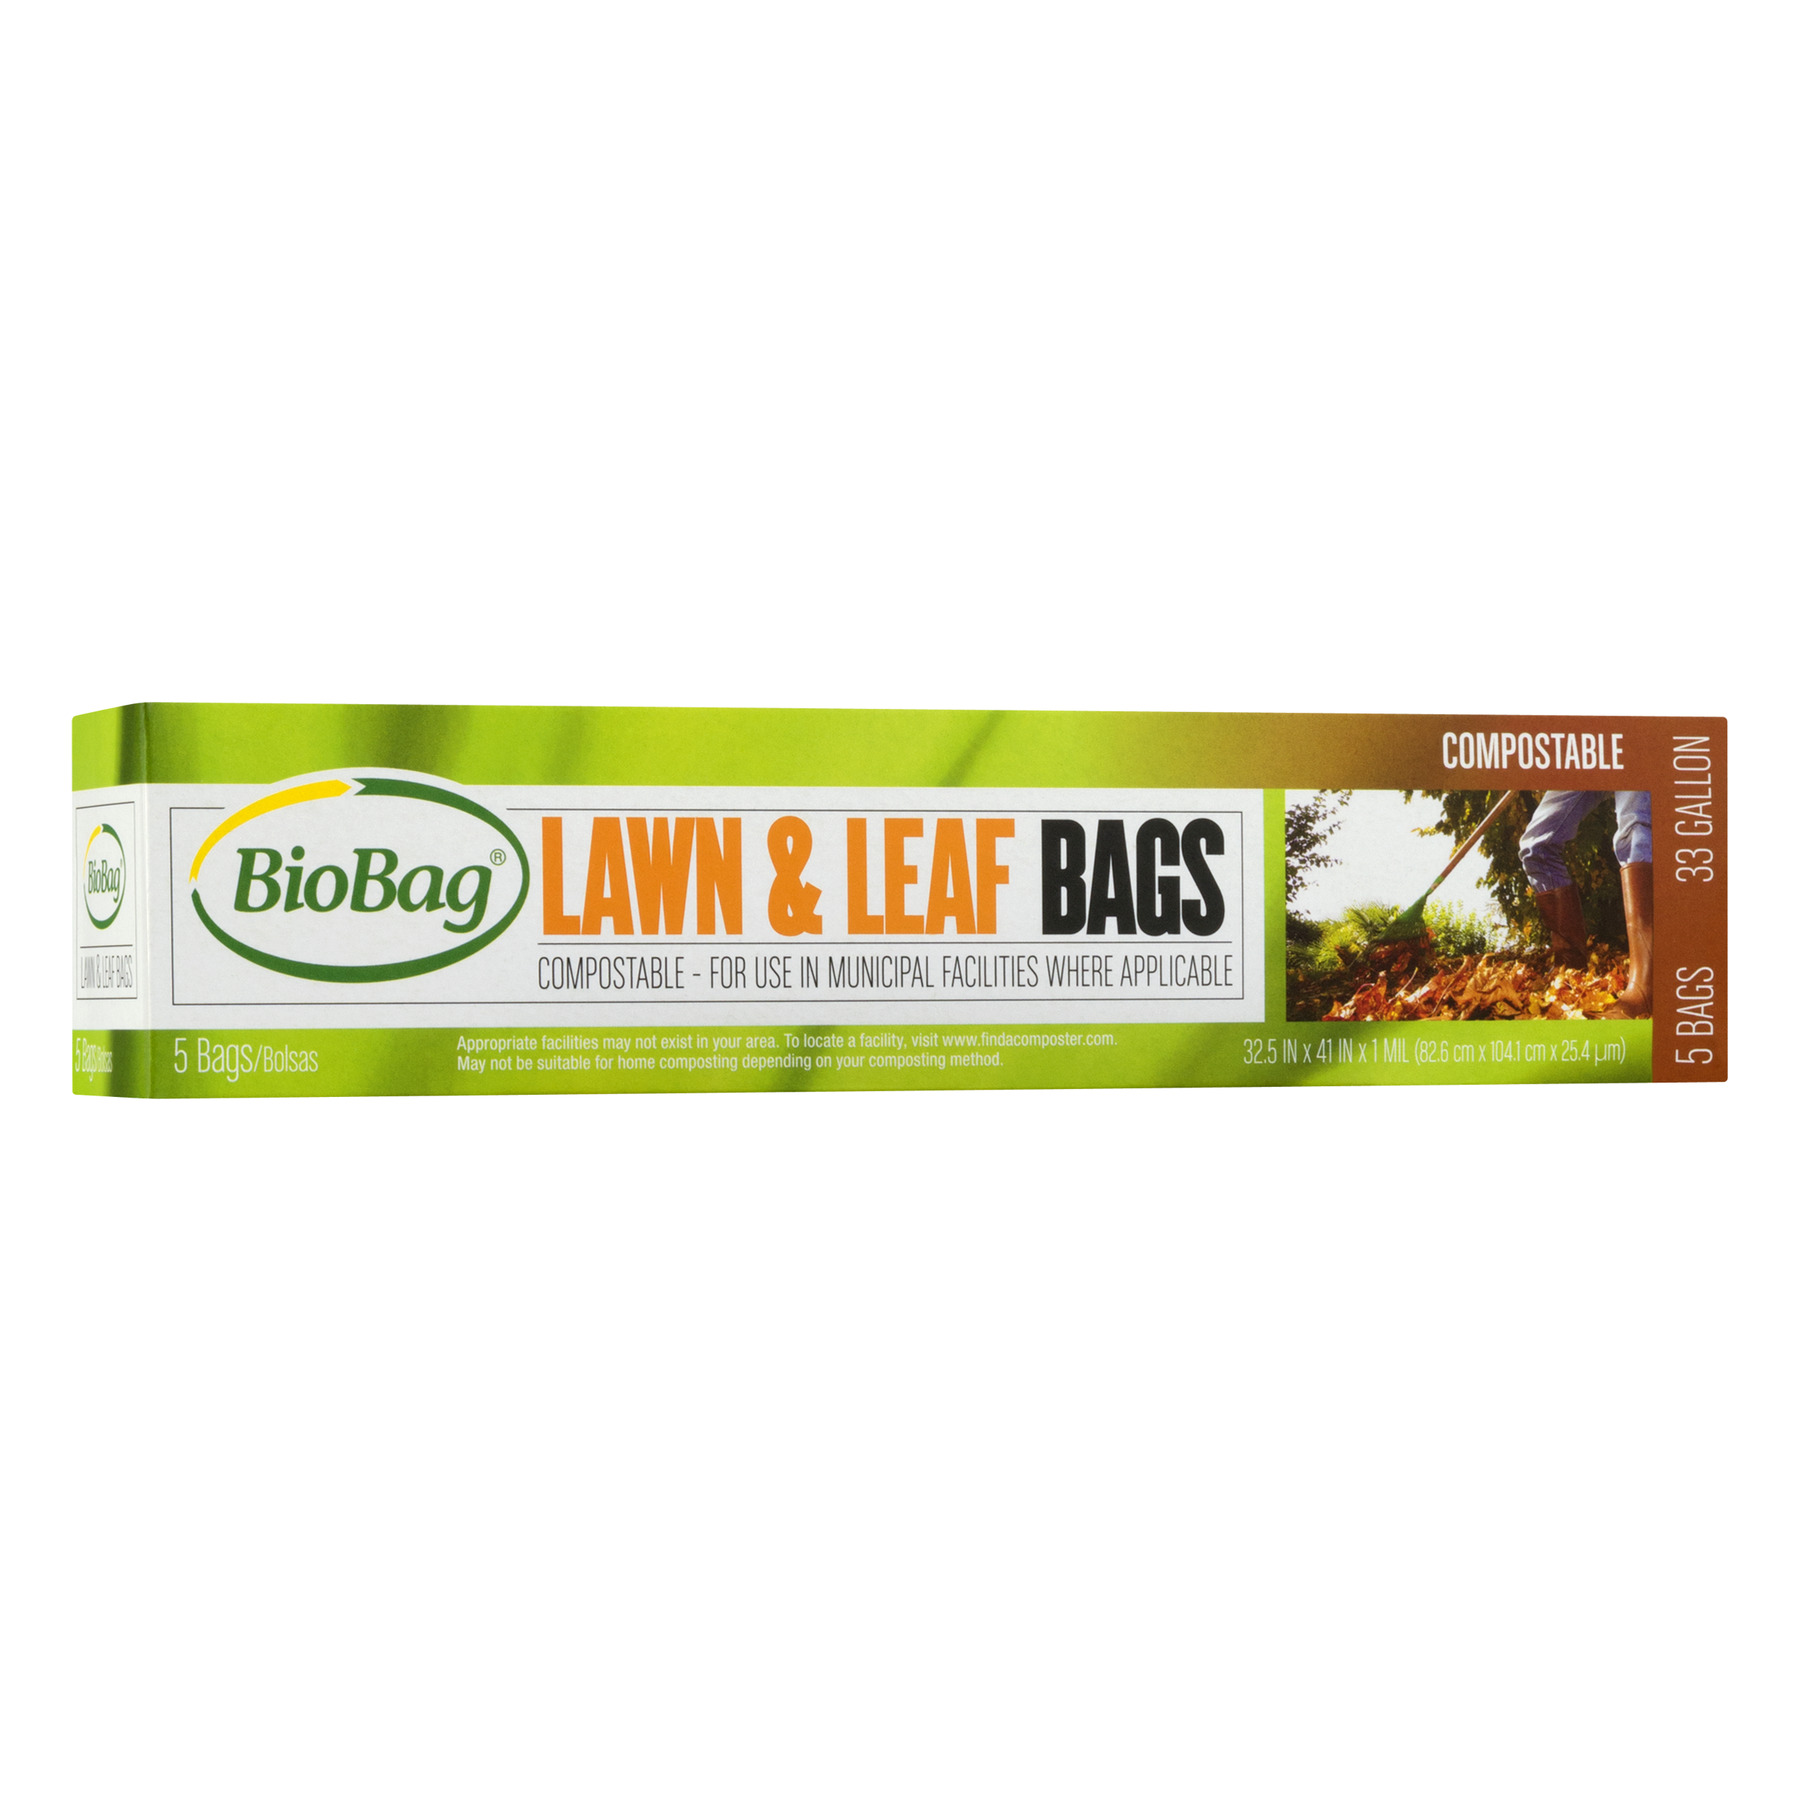 BioBag City Of Houston Compostable Lawn & Leaf Bags, 33 Gallon, 10